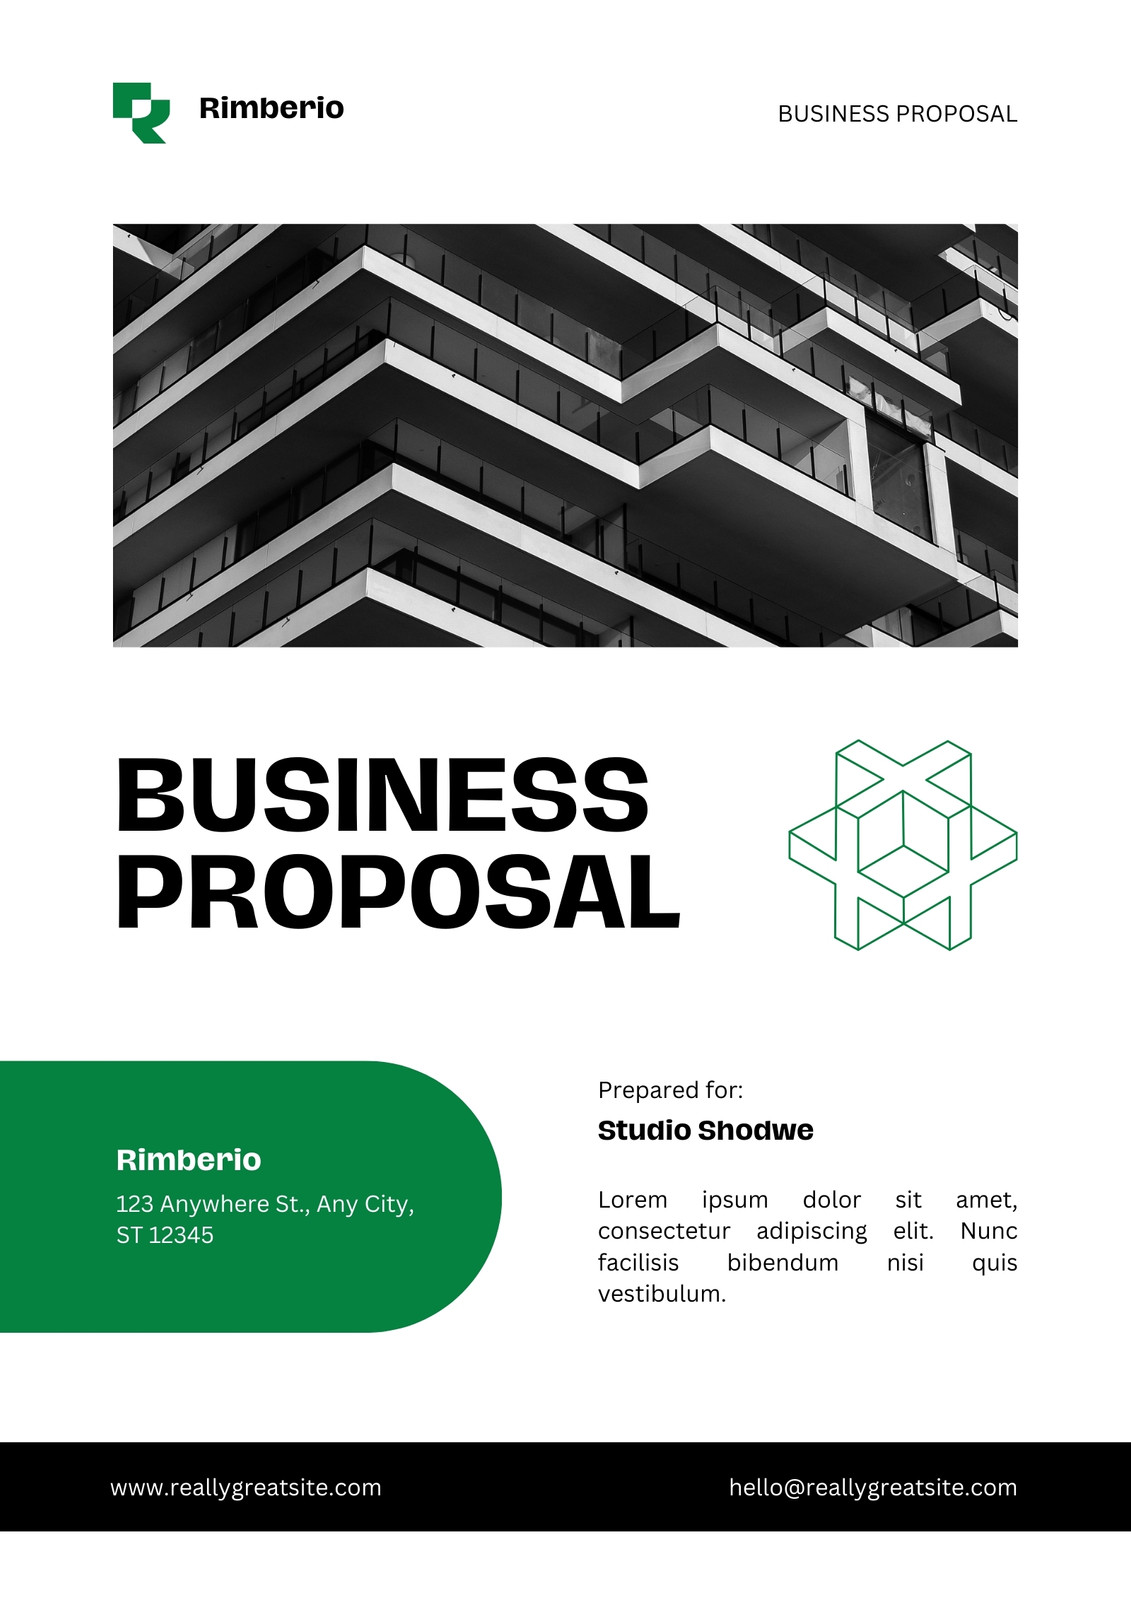 Free Clean Business Proposal Template - Customize with PicMonkey